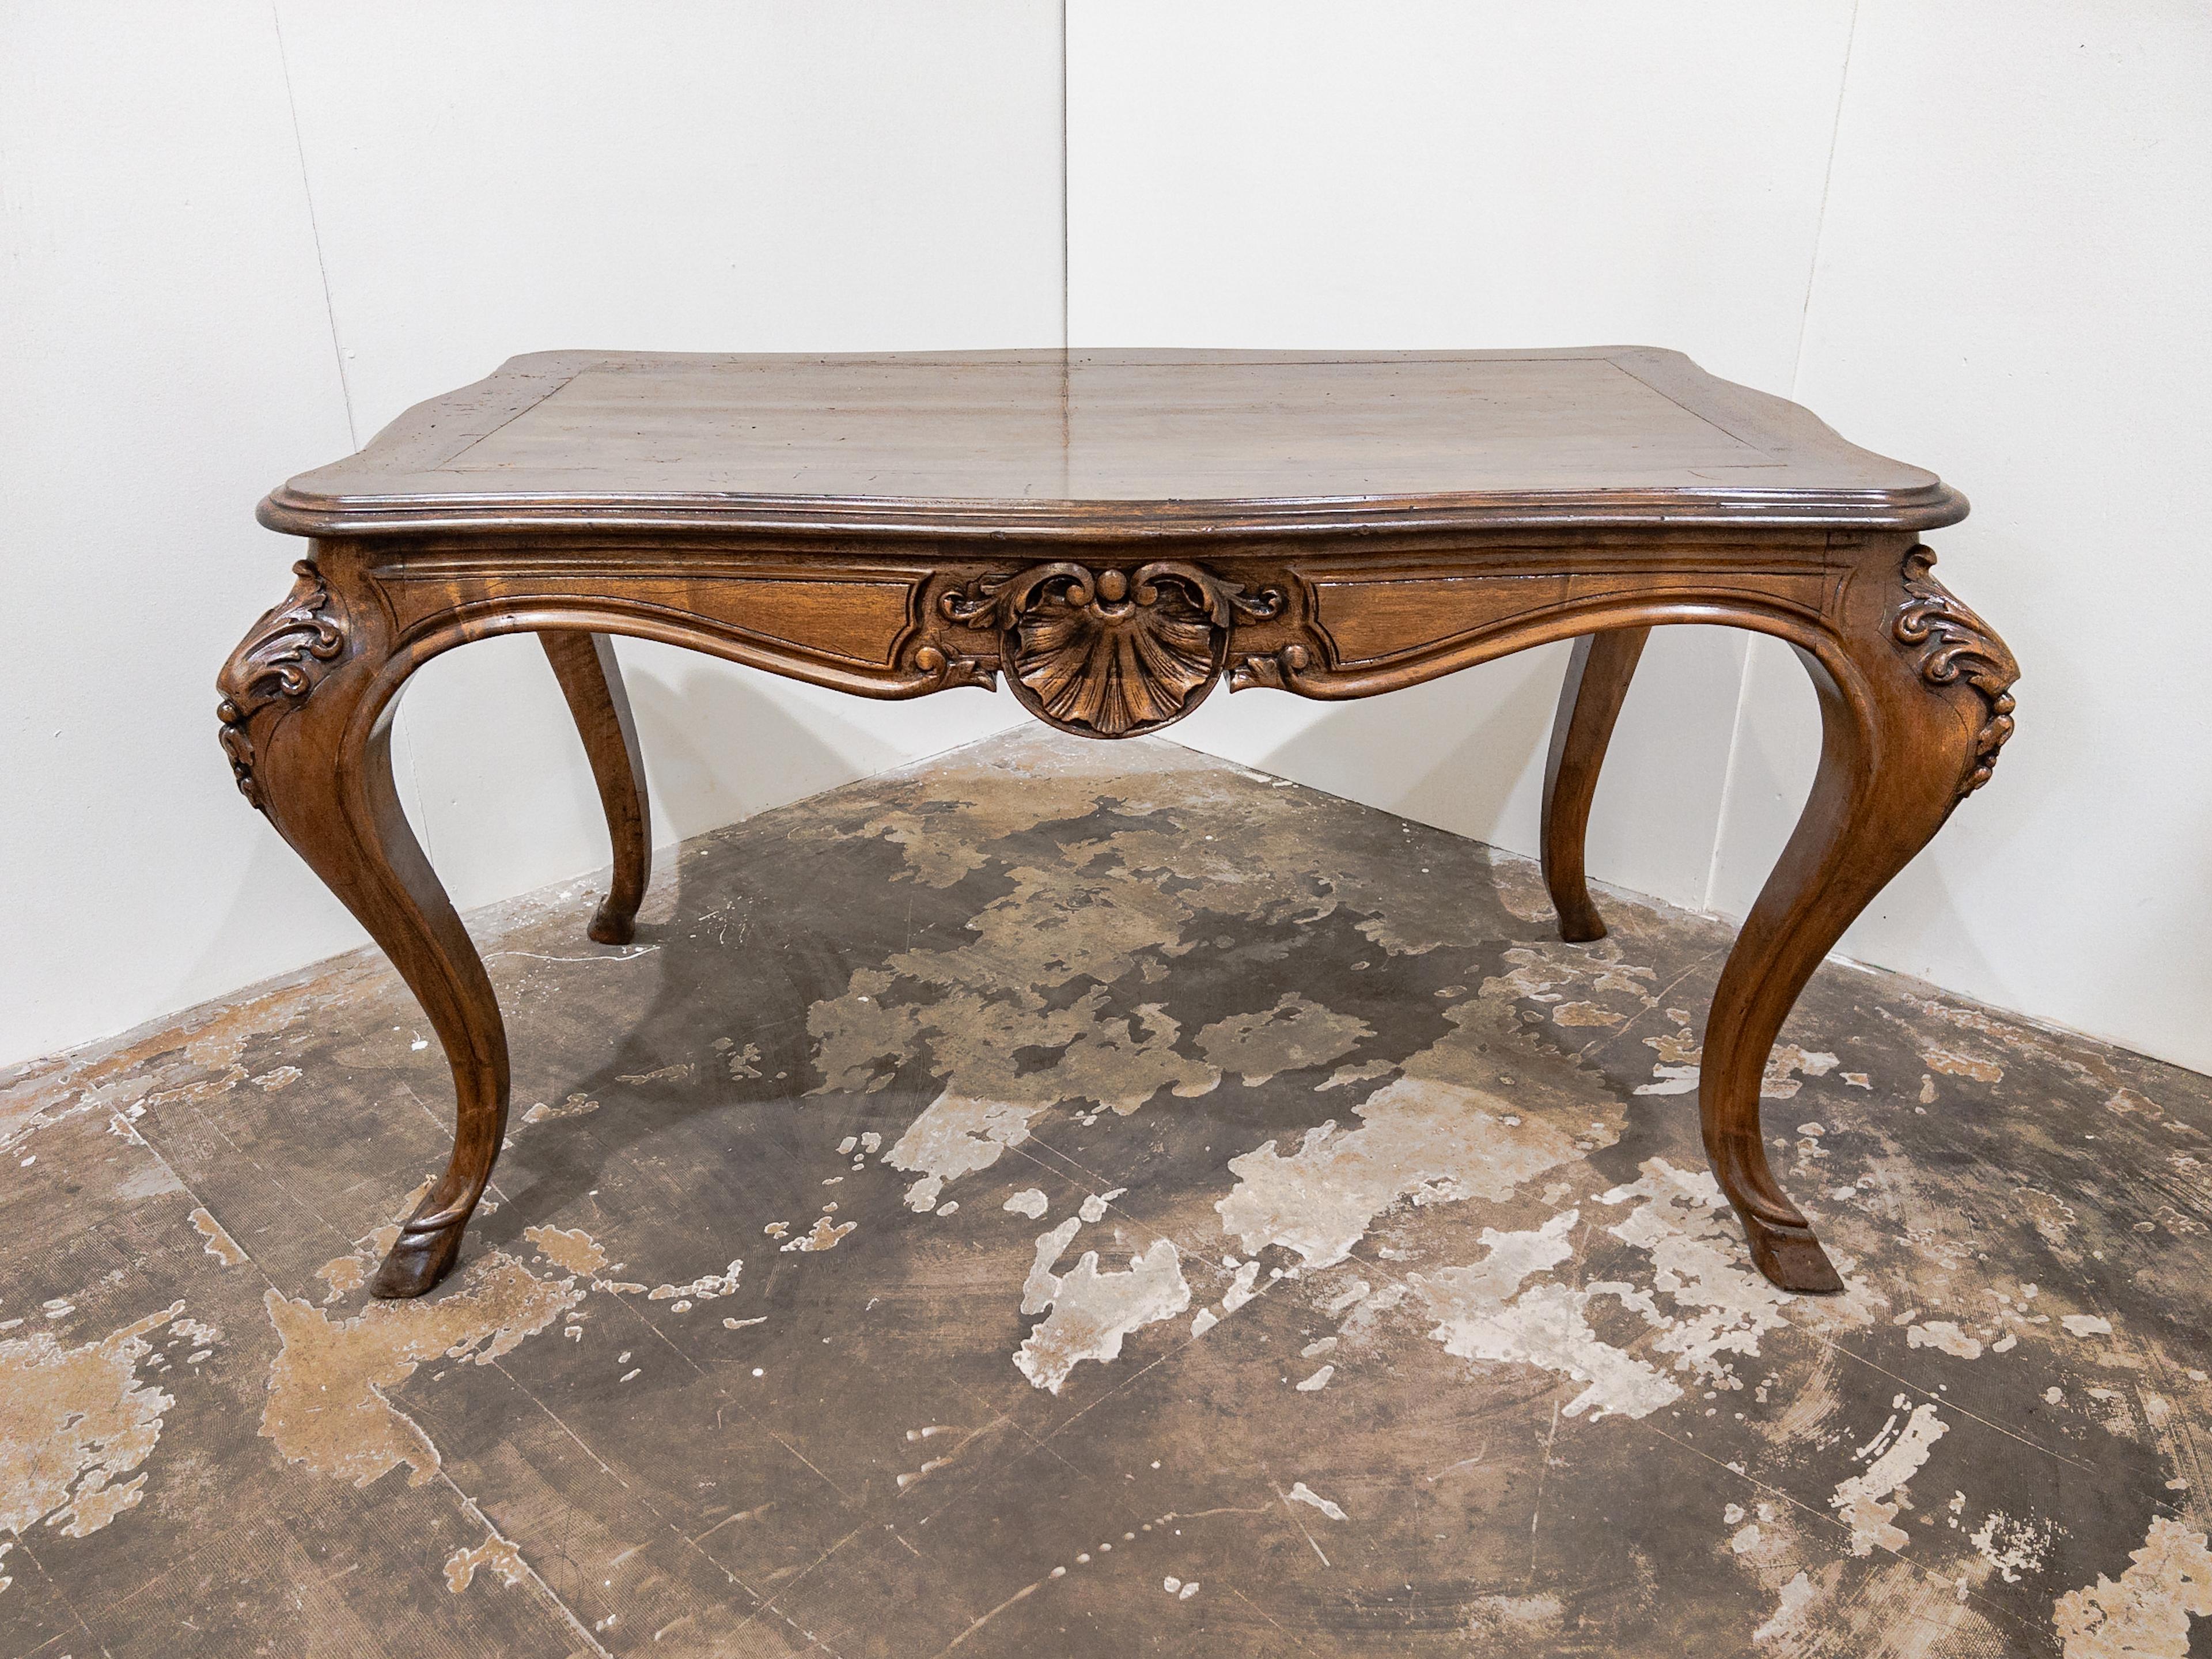 Italian 19th Century Walnut Louis XV Style Hoof Leg Table with a scalloped apron and carved details on the legs is an exquisite and finely crafted piece of furniture originating from Italy during the 1800s.

The table features a rectangular or